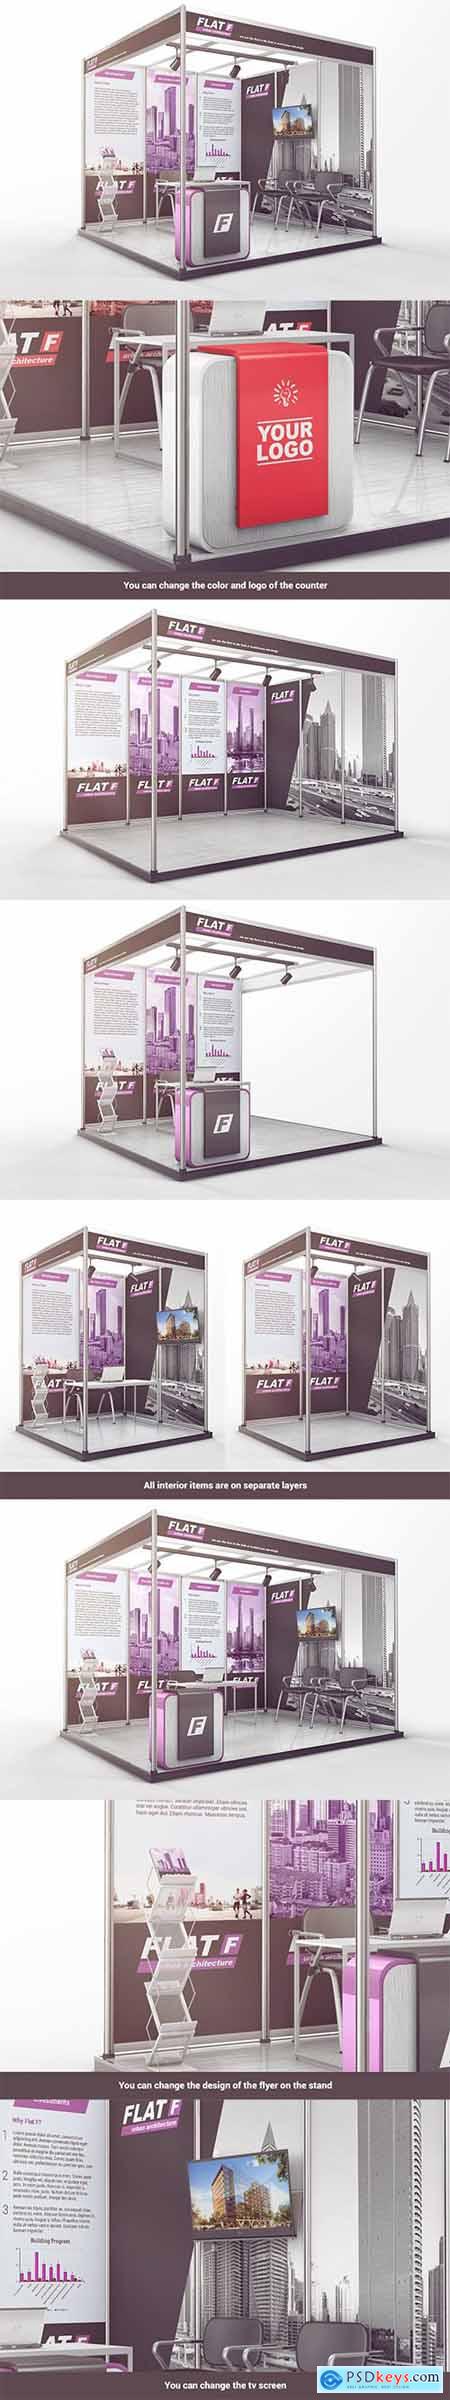 Various Exhibition Trade Show Shell Scheme Mockup